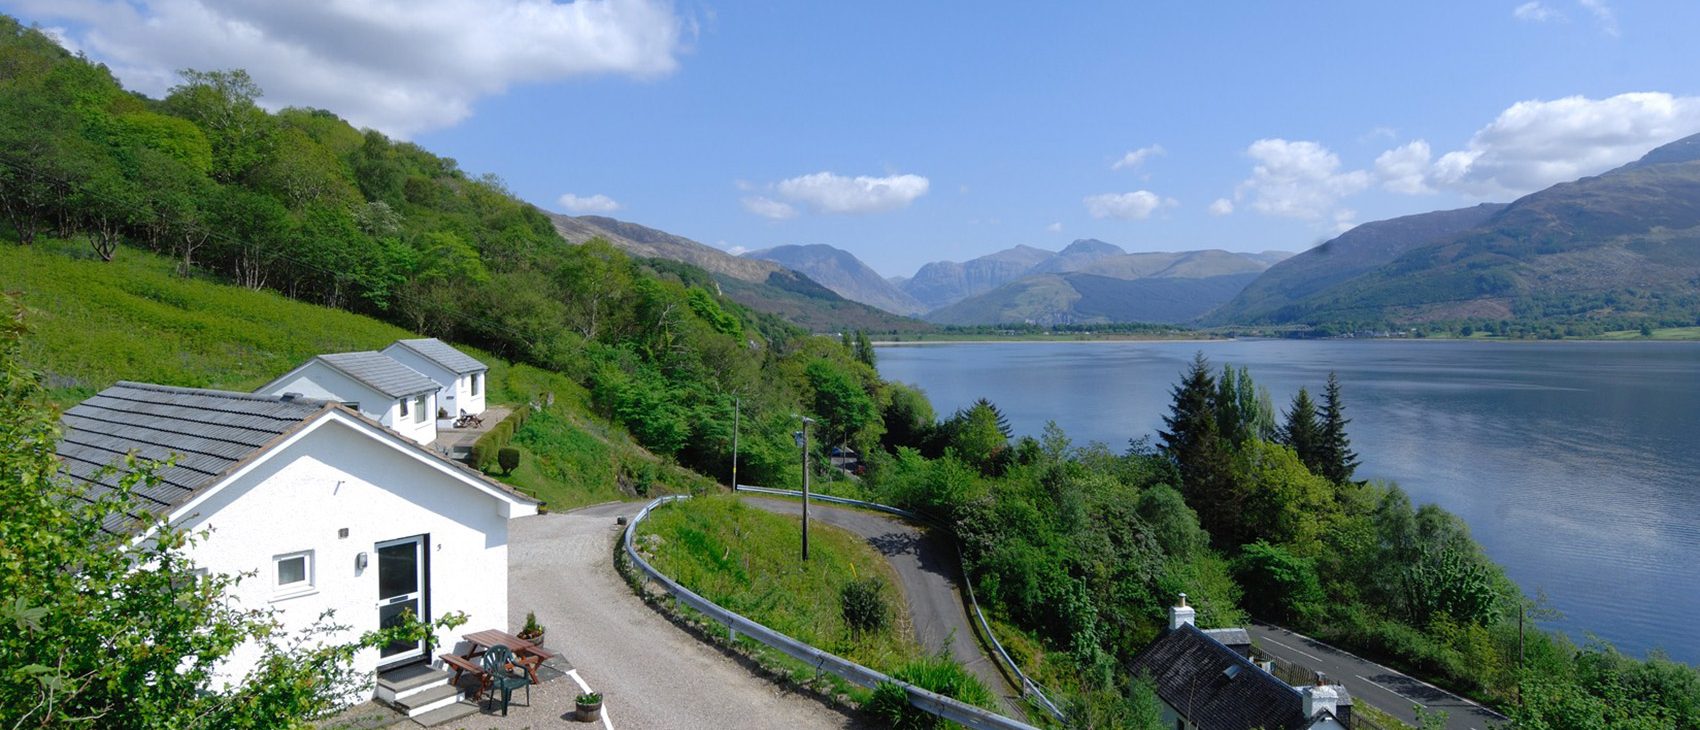 A selection of 3 and 4 star self catering
Cottages in the Scottish Highlands
set high above Loch Linnhe and Loch Leven 
with panoramic views
